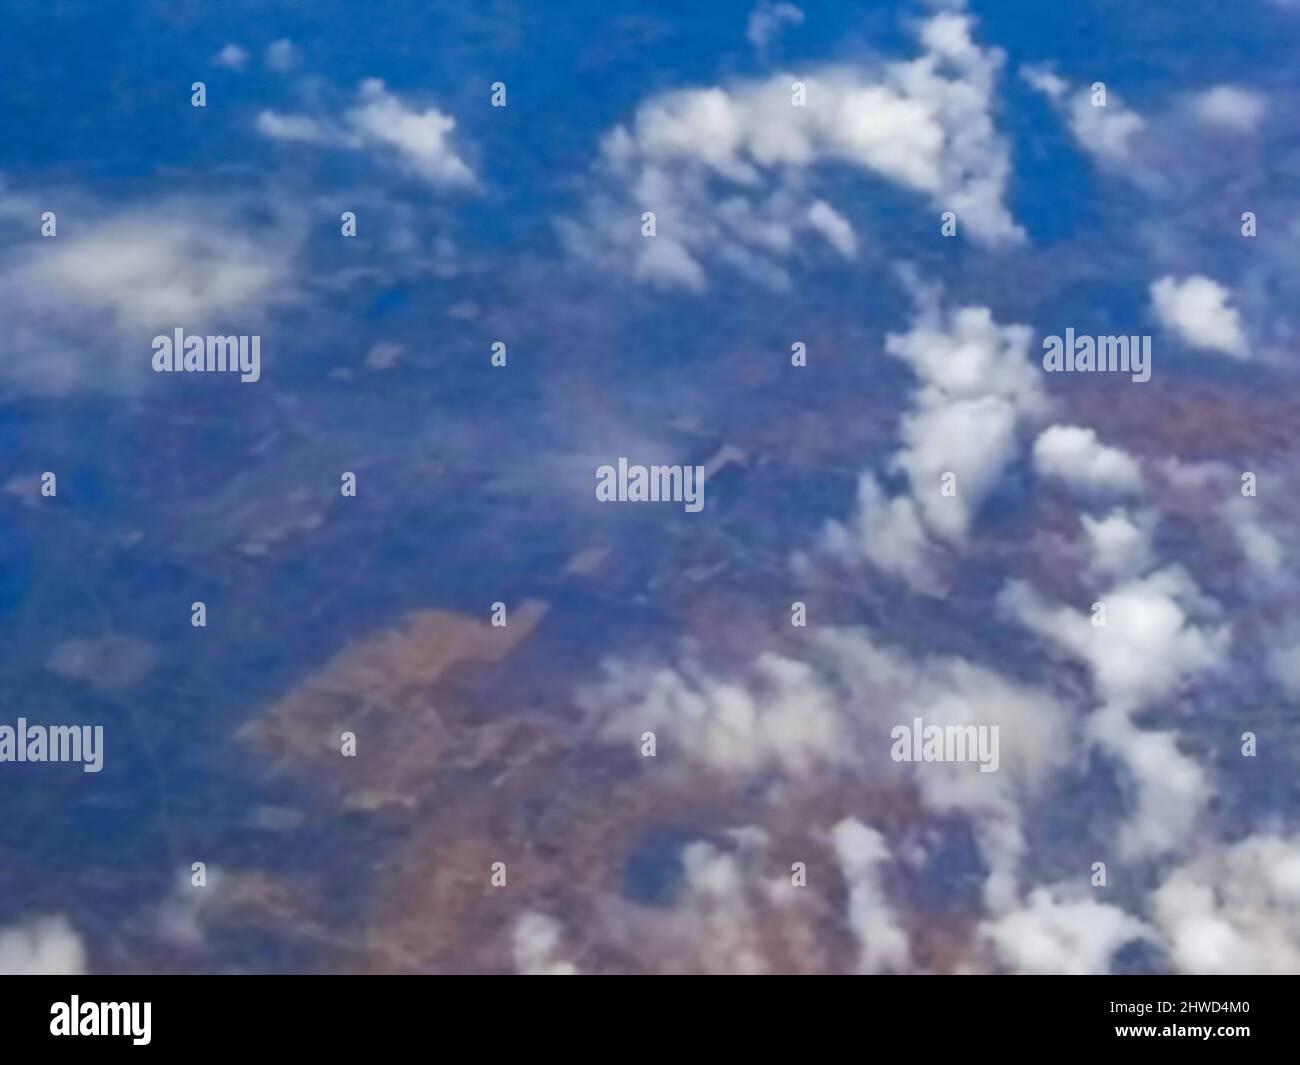 Blurred image of nice white clouds in the atmosphere, image shot in the sky from aeroplane. Nature stock image. Stock Photo